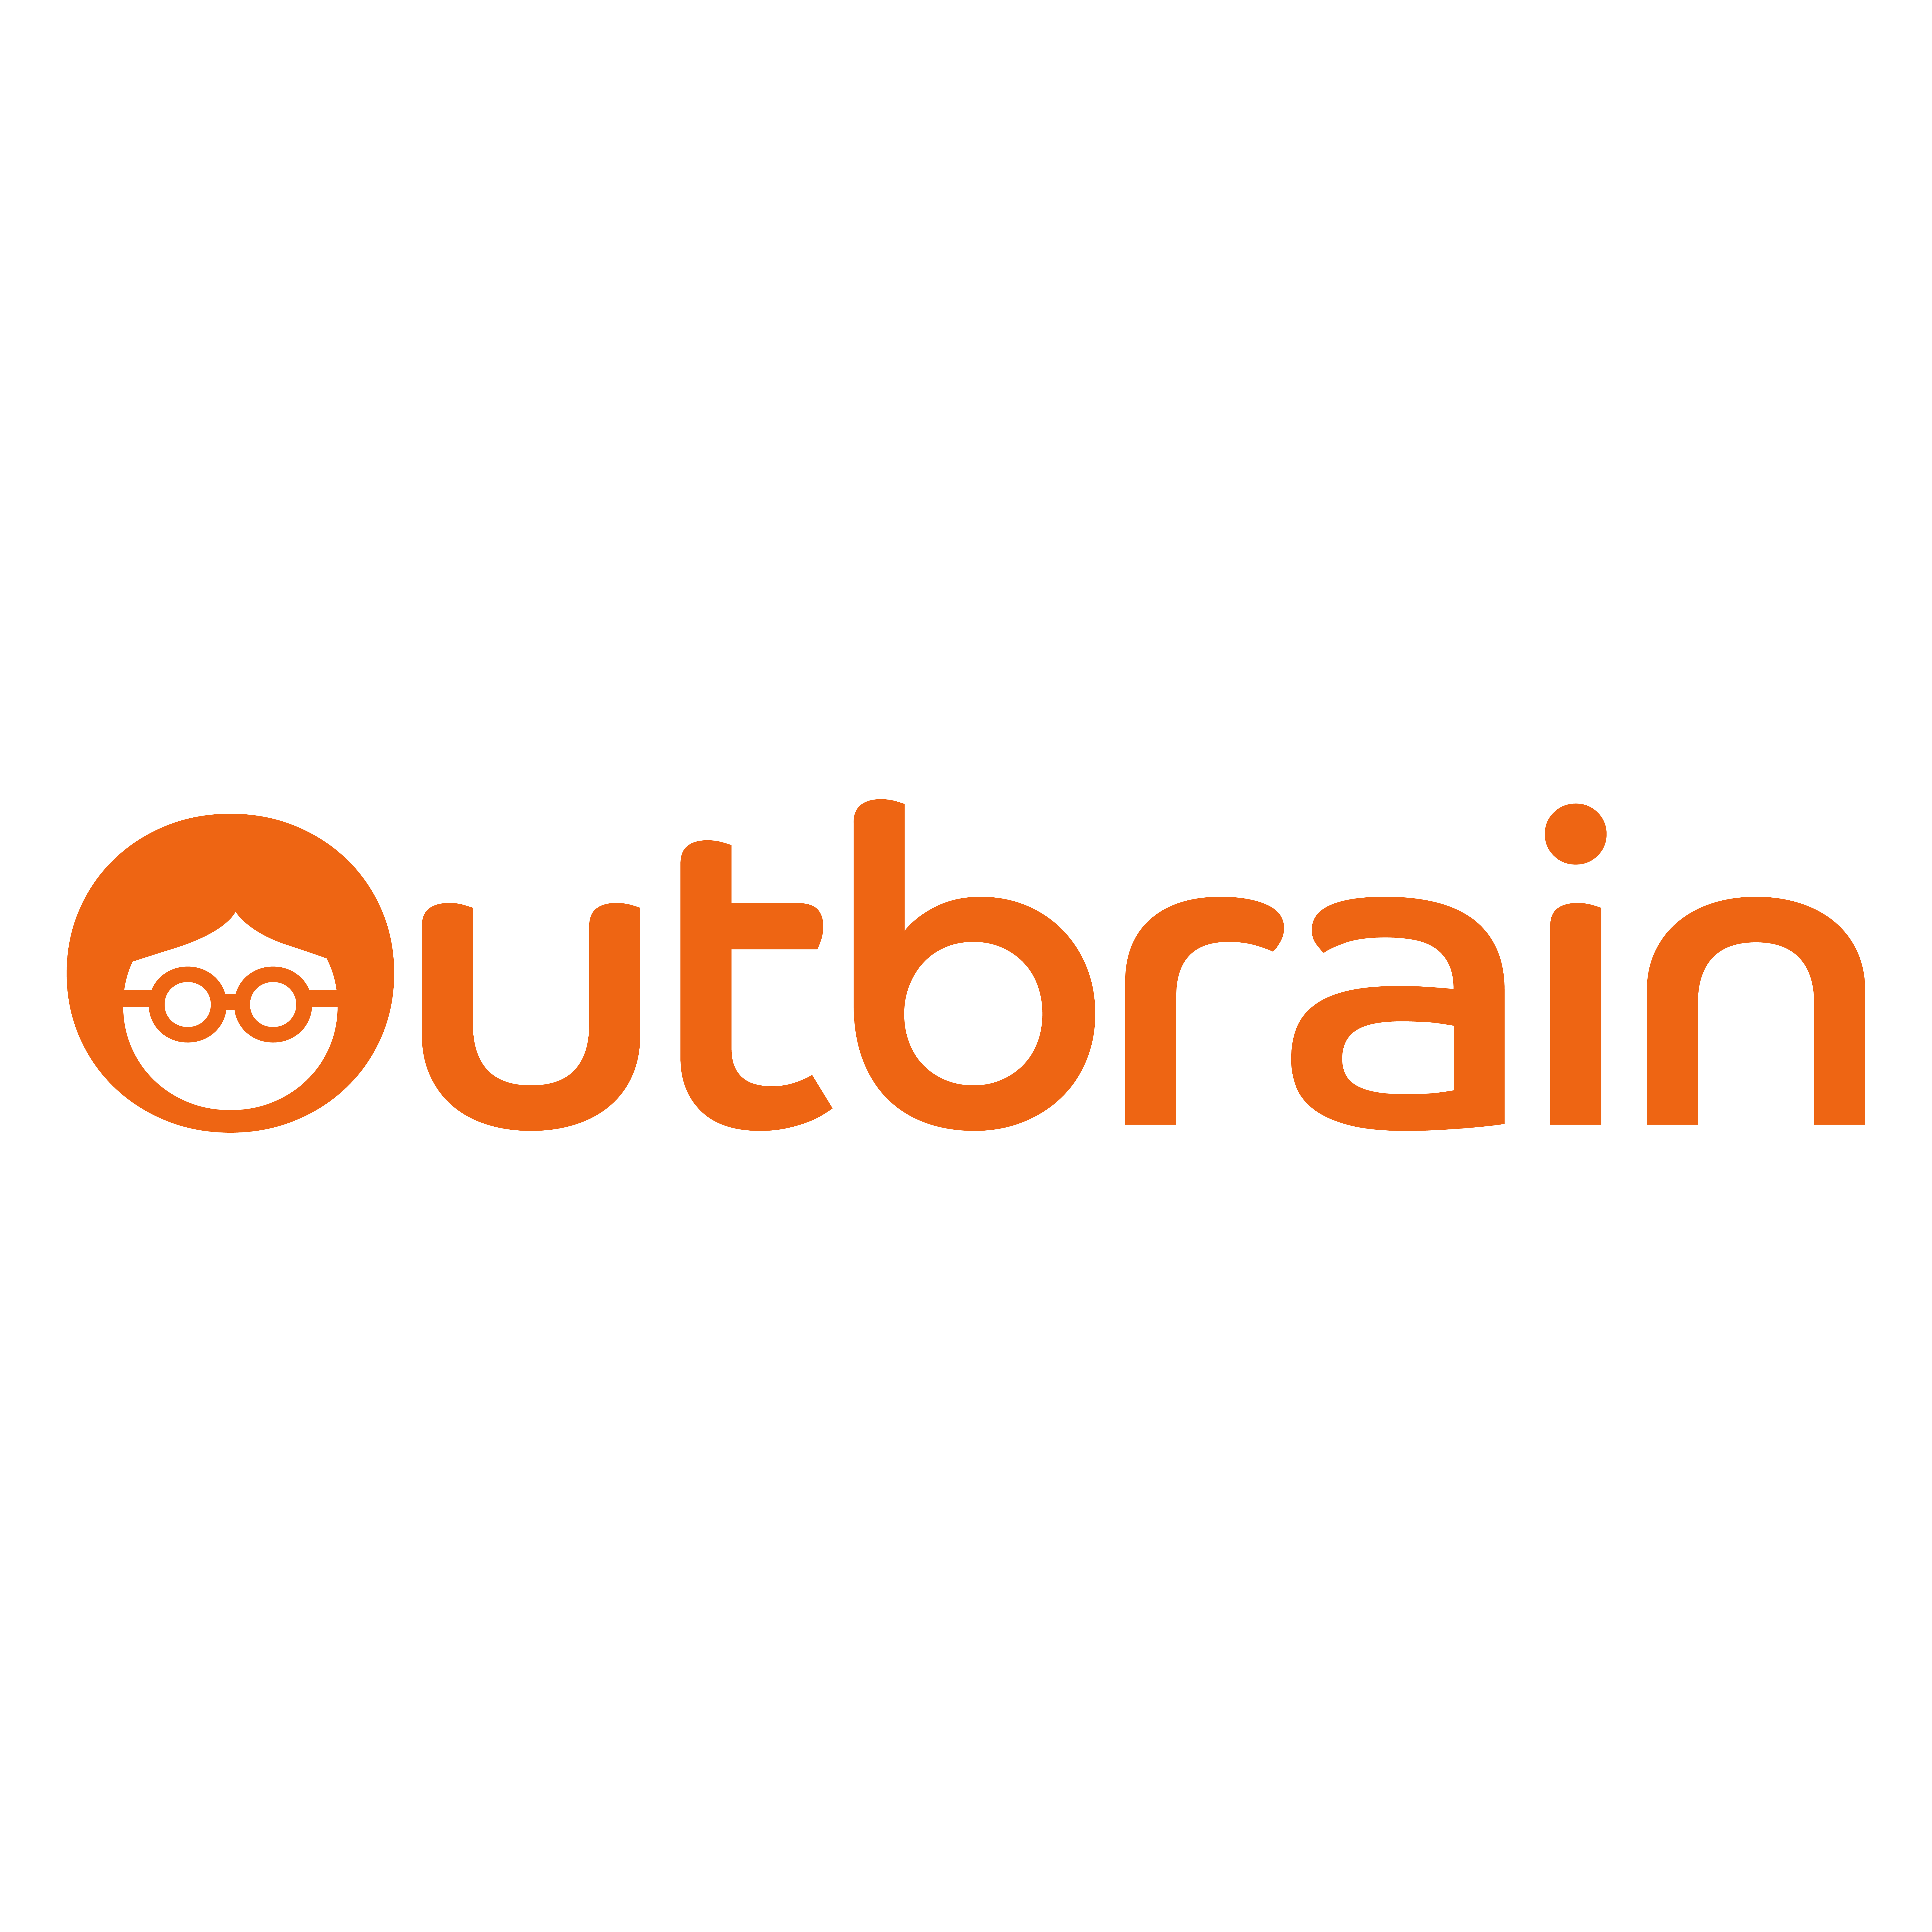 Outbrain Appoints Alexander Erlmeier as Chief Revenue Officer